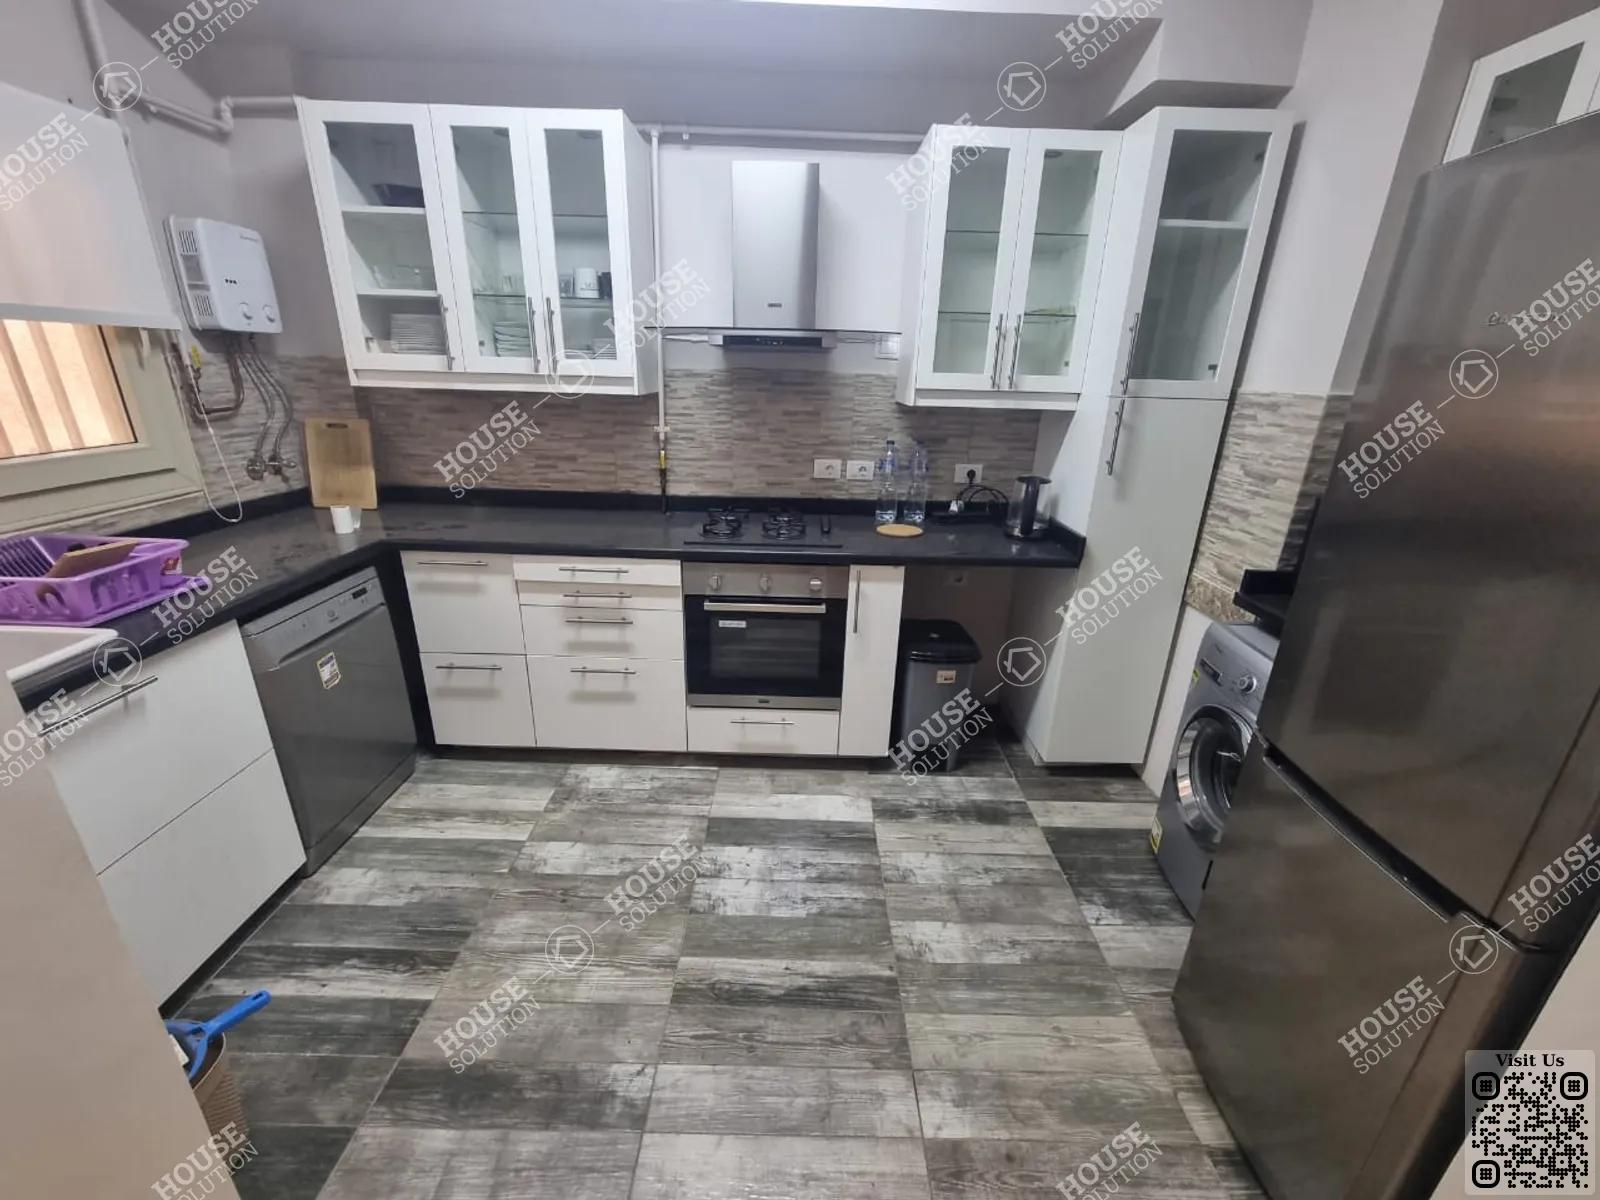 KITCHEN  @ Apartments For Rent In Maadi Maadi Sarayat Area: 130 m² consists of 2 Bedrooms 2 Bathrooms Modern furnished 5 stars #5662-1